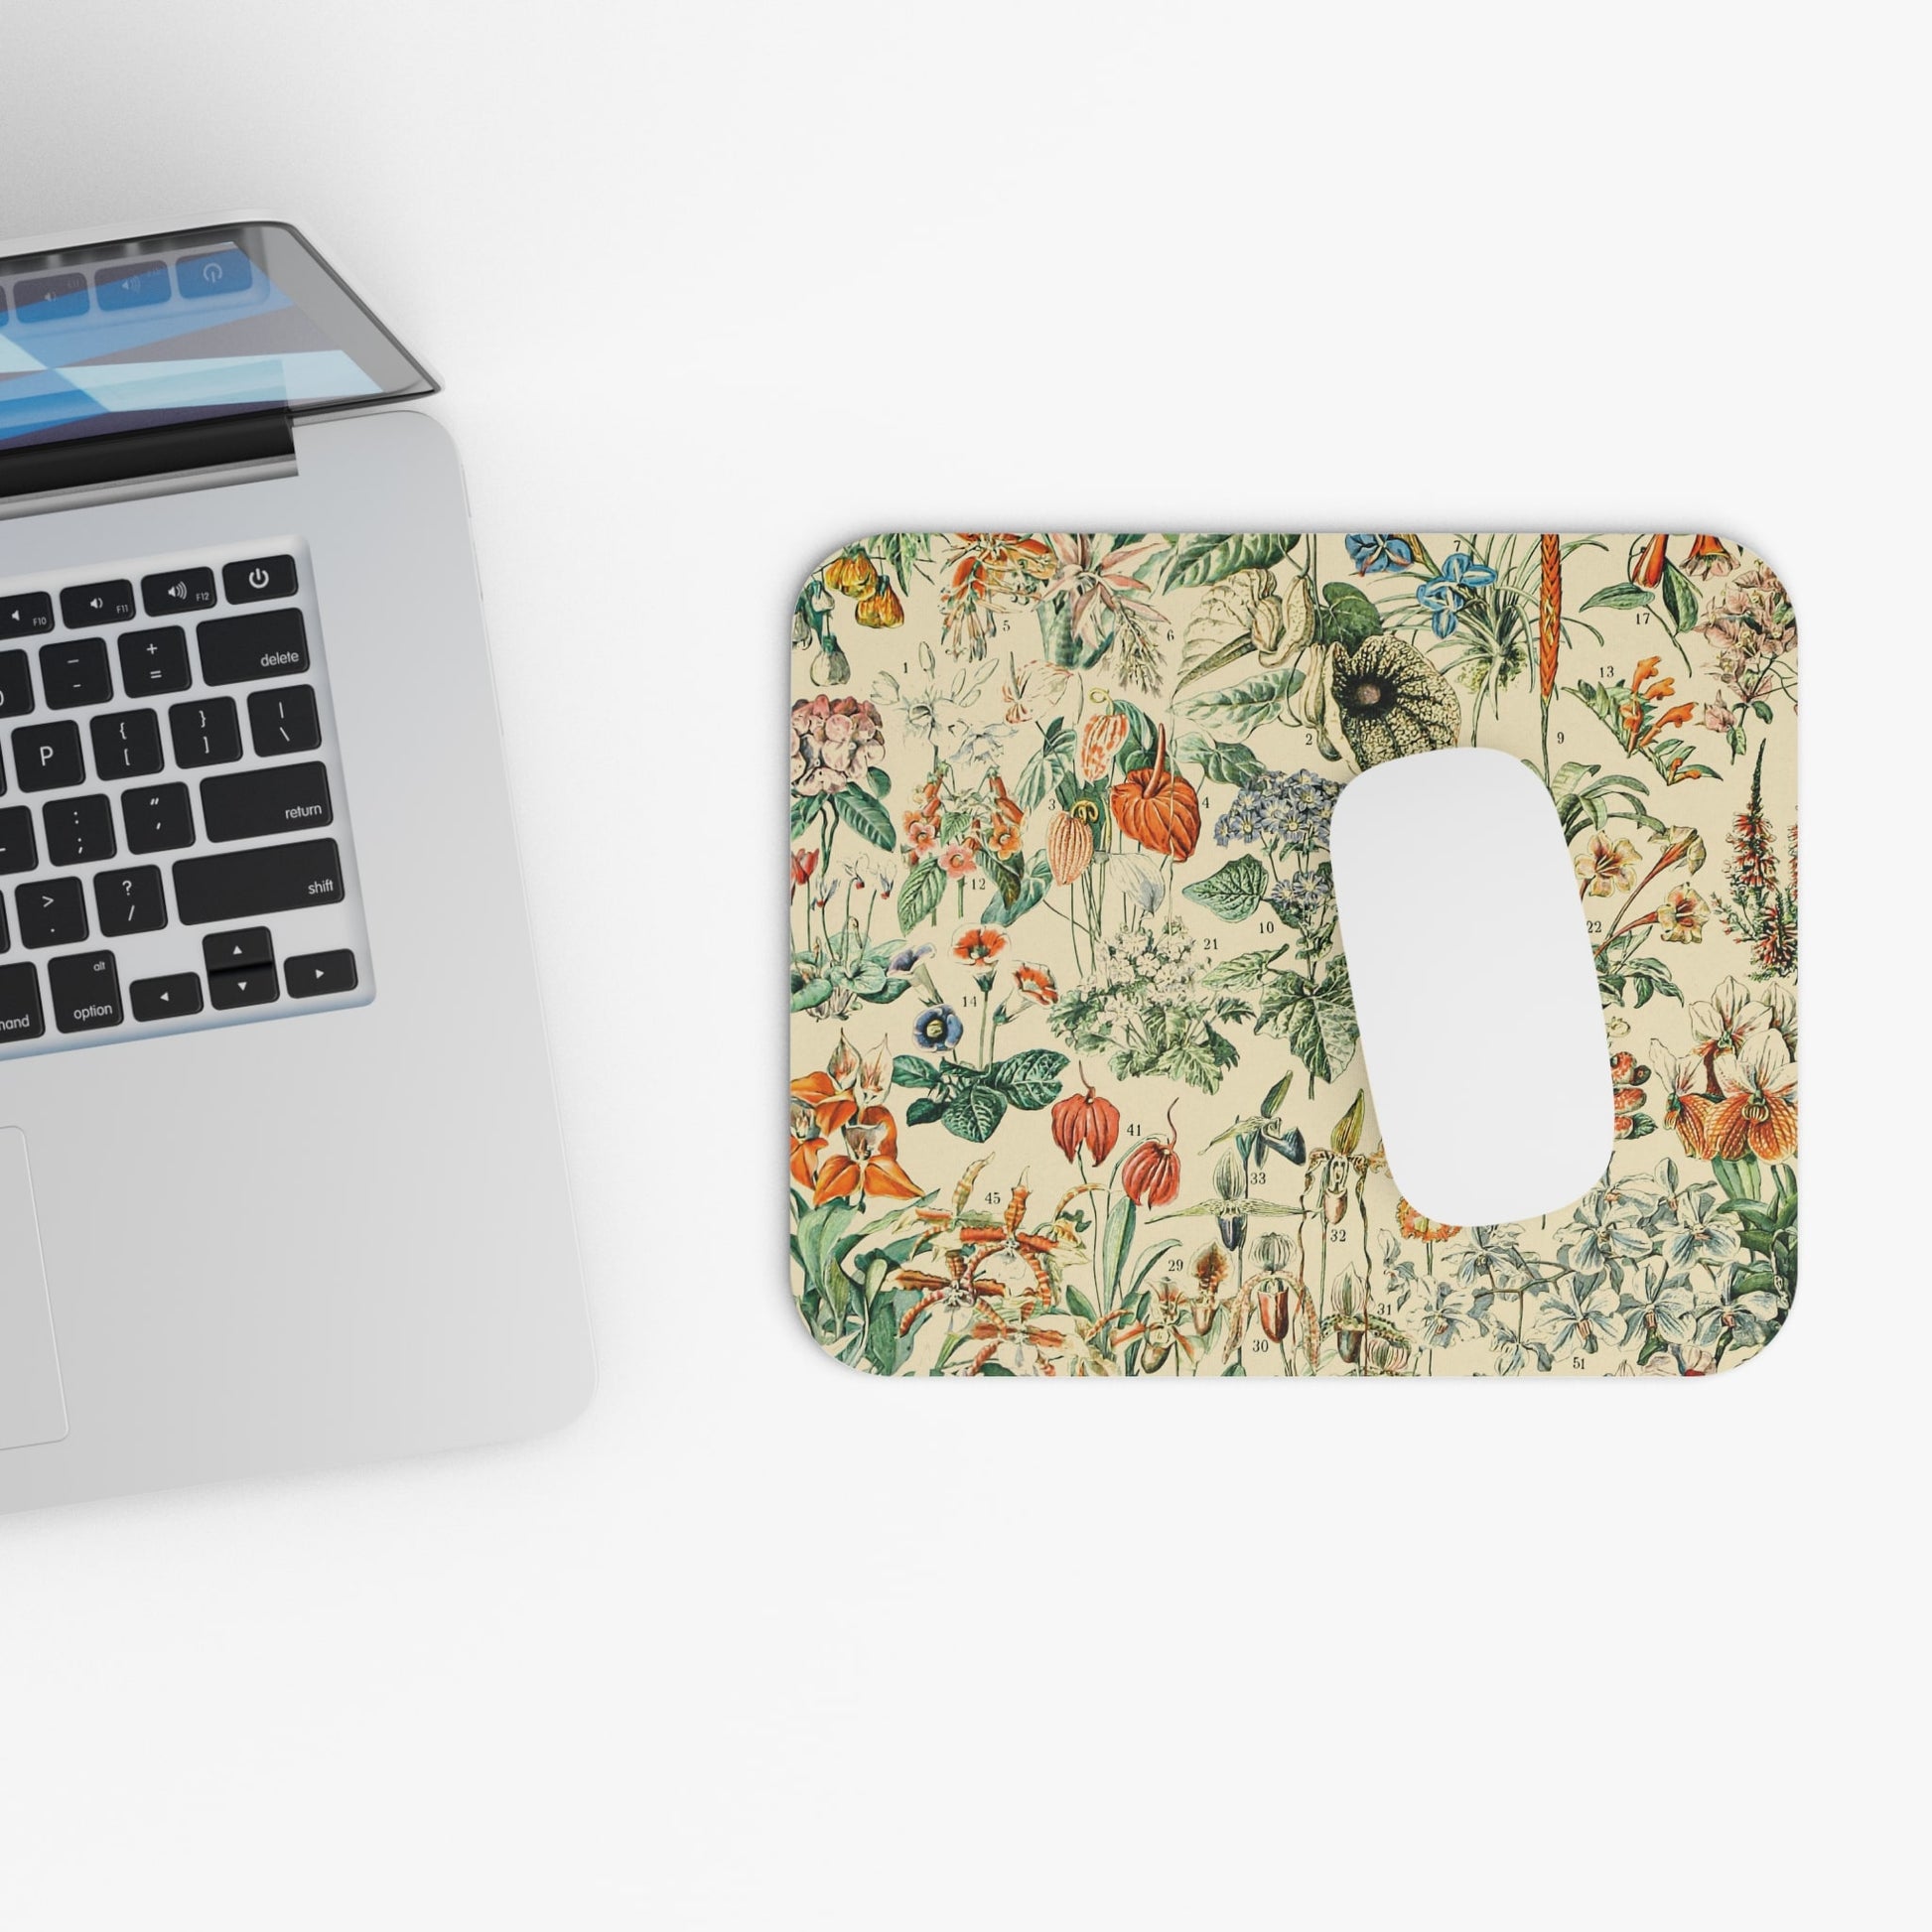 Vintage Wildflower and Plants Design Laptop Mouse Pad with White Mouse